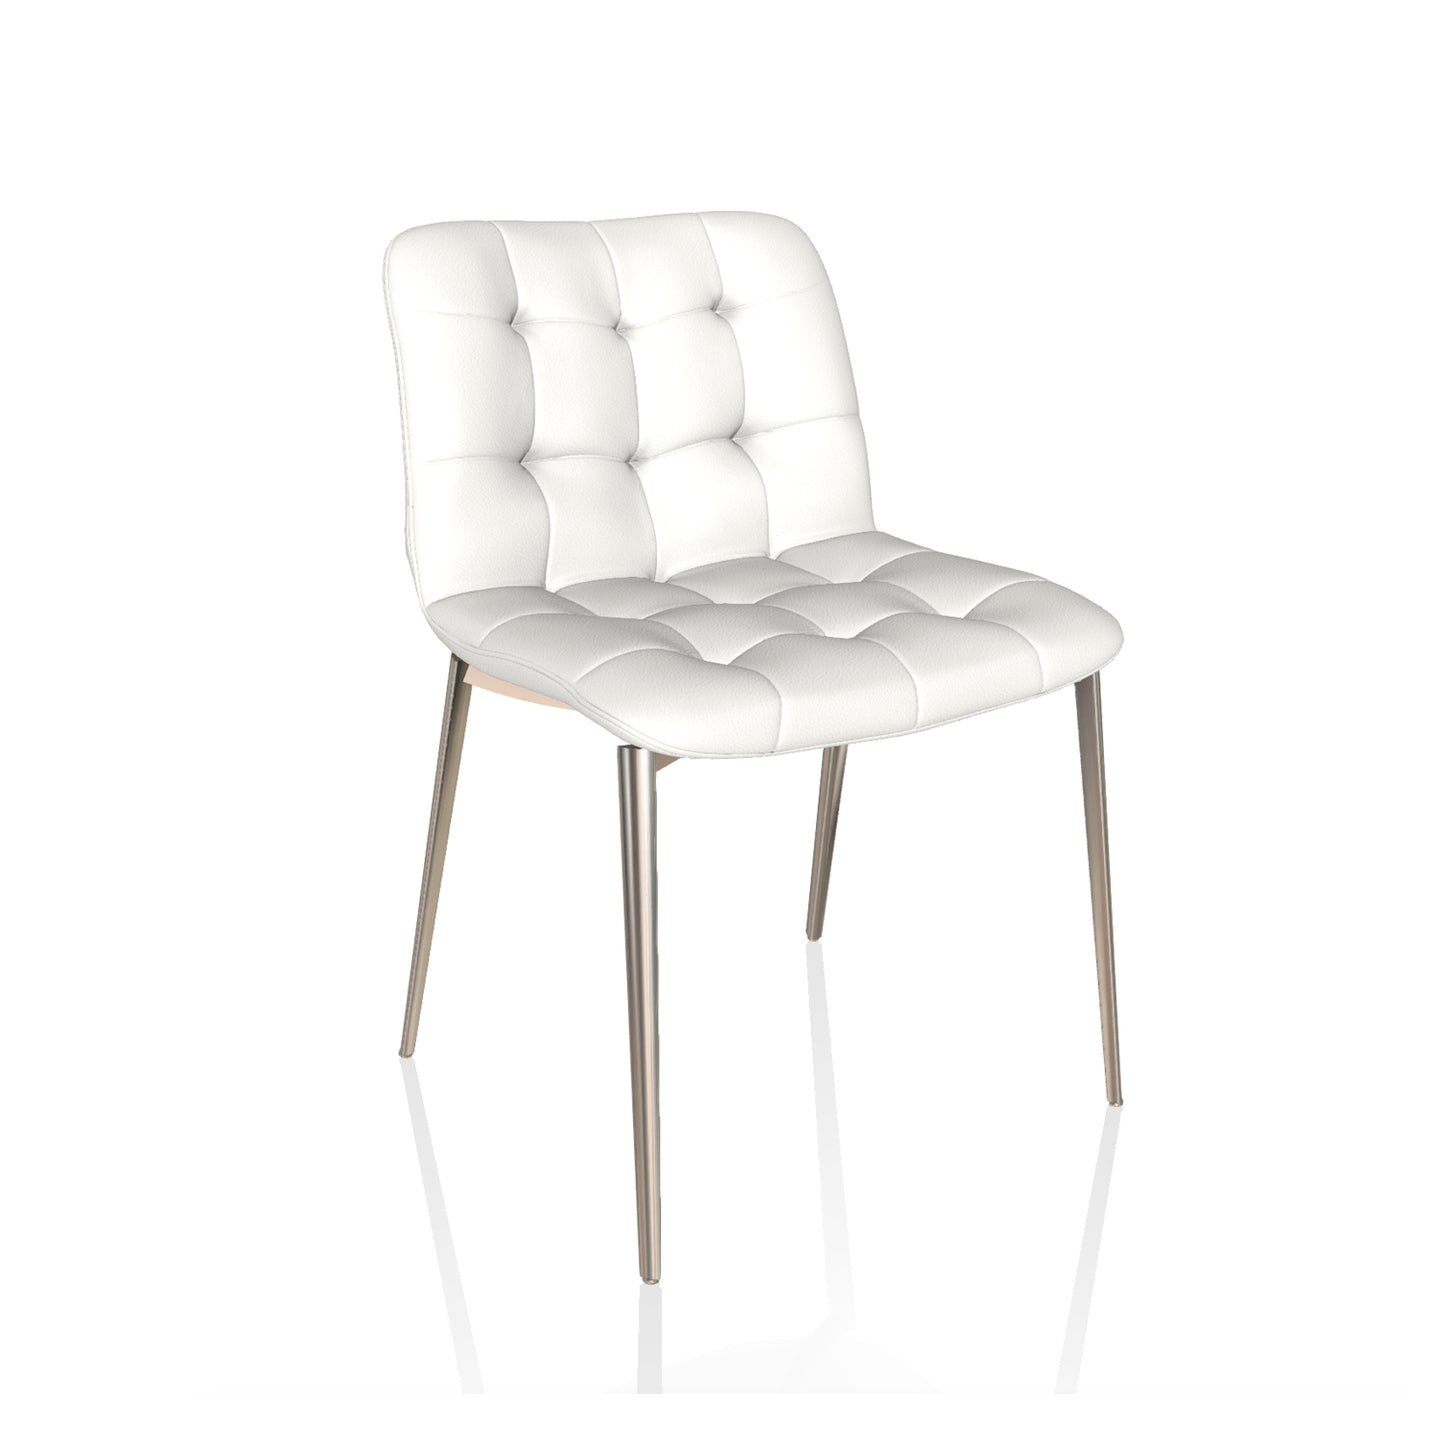 Kuga Dining Chair By Bontempi Casa - Eco White Leather & Chrome Metal Frame